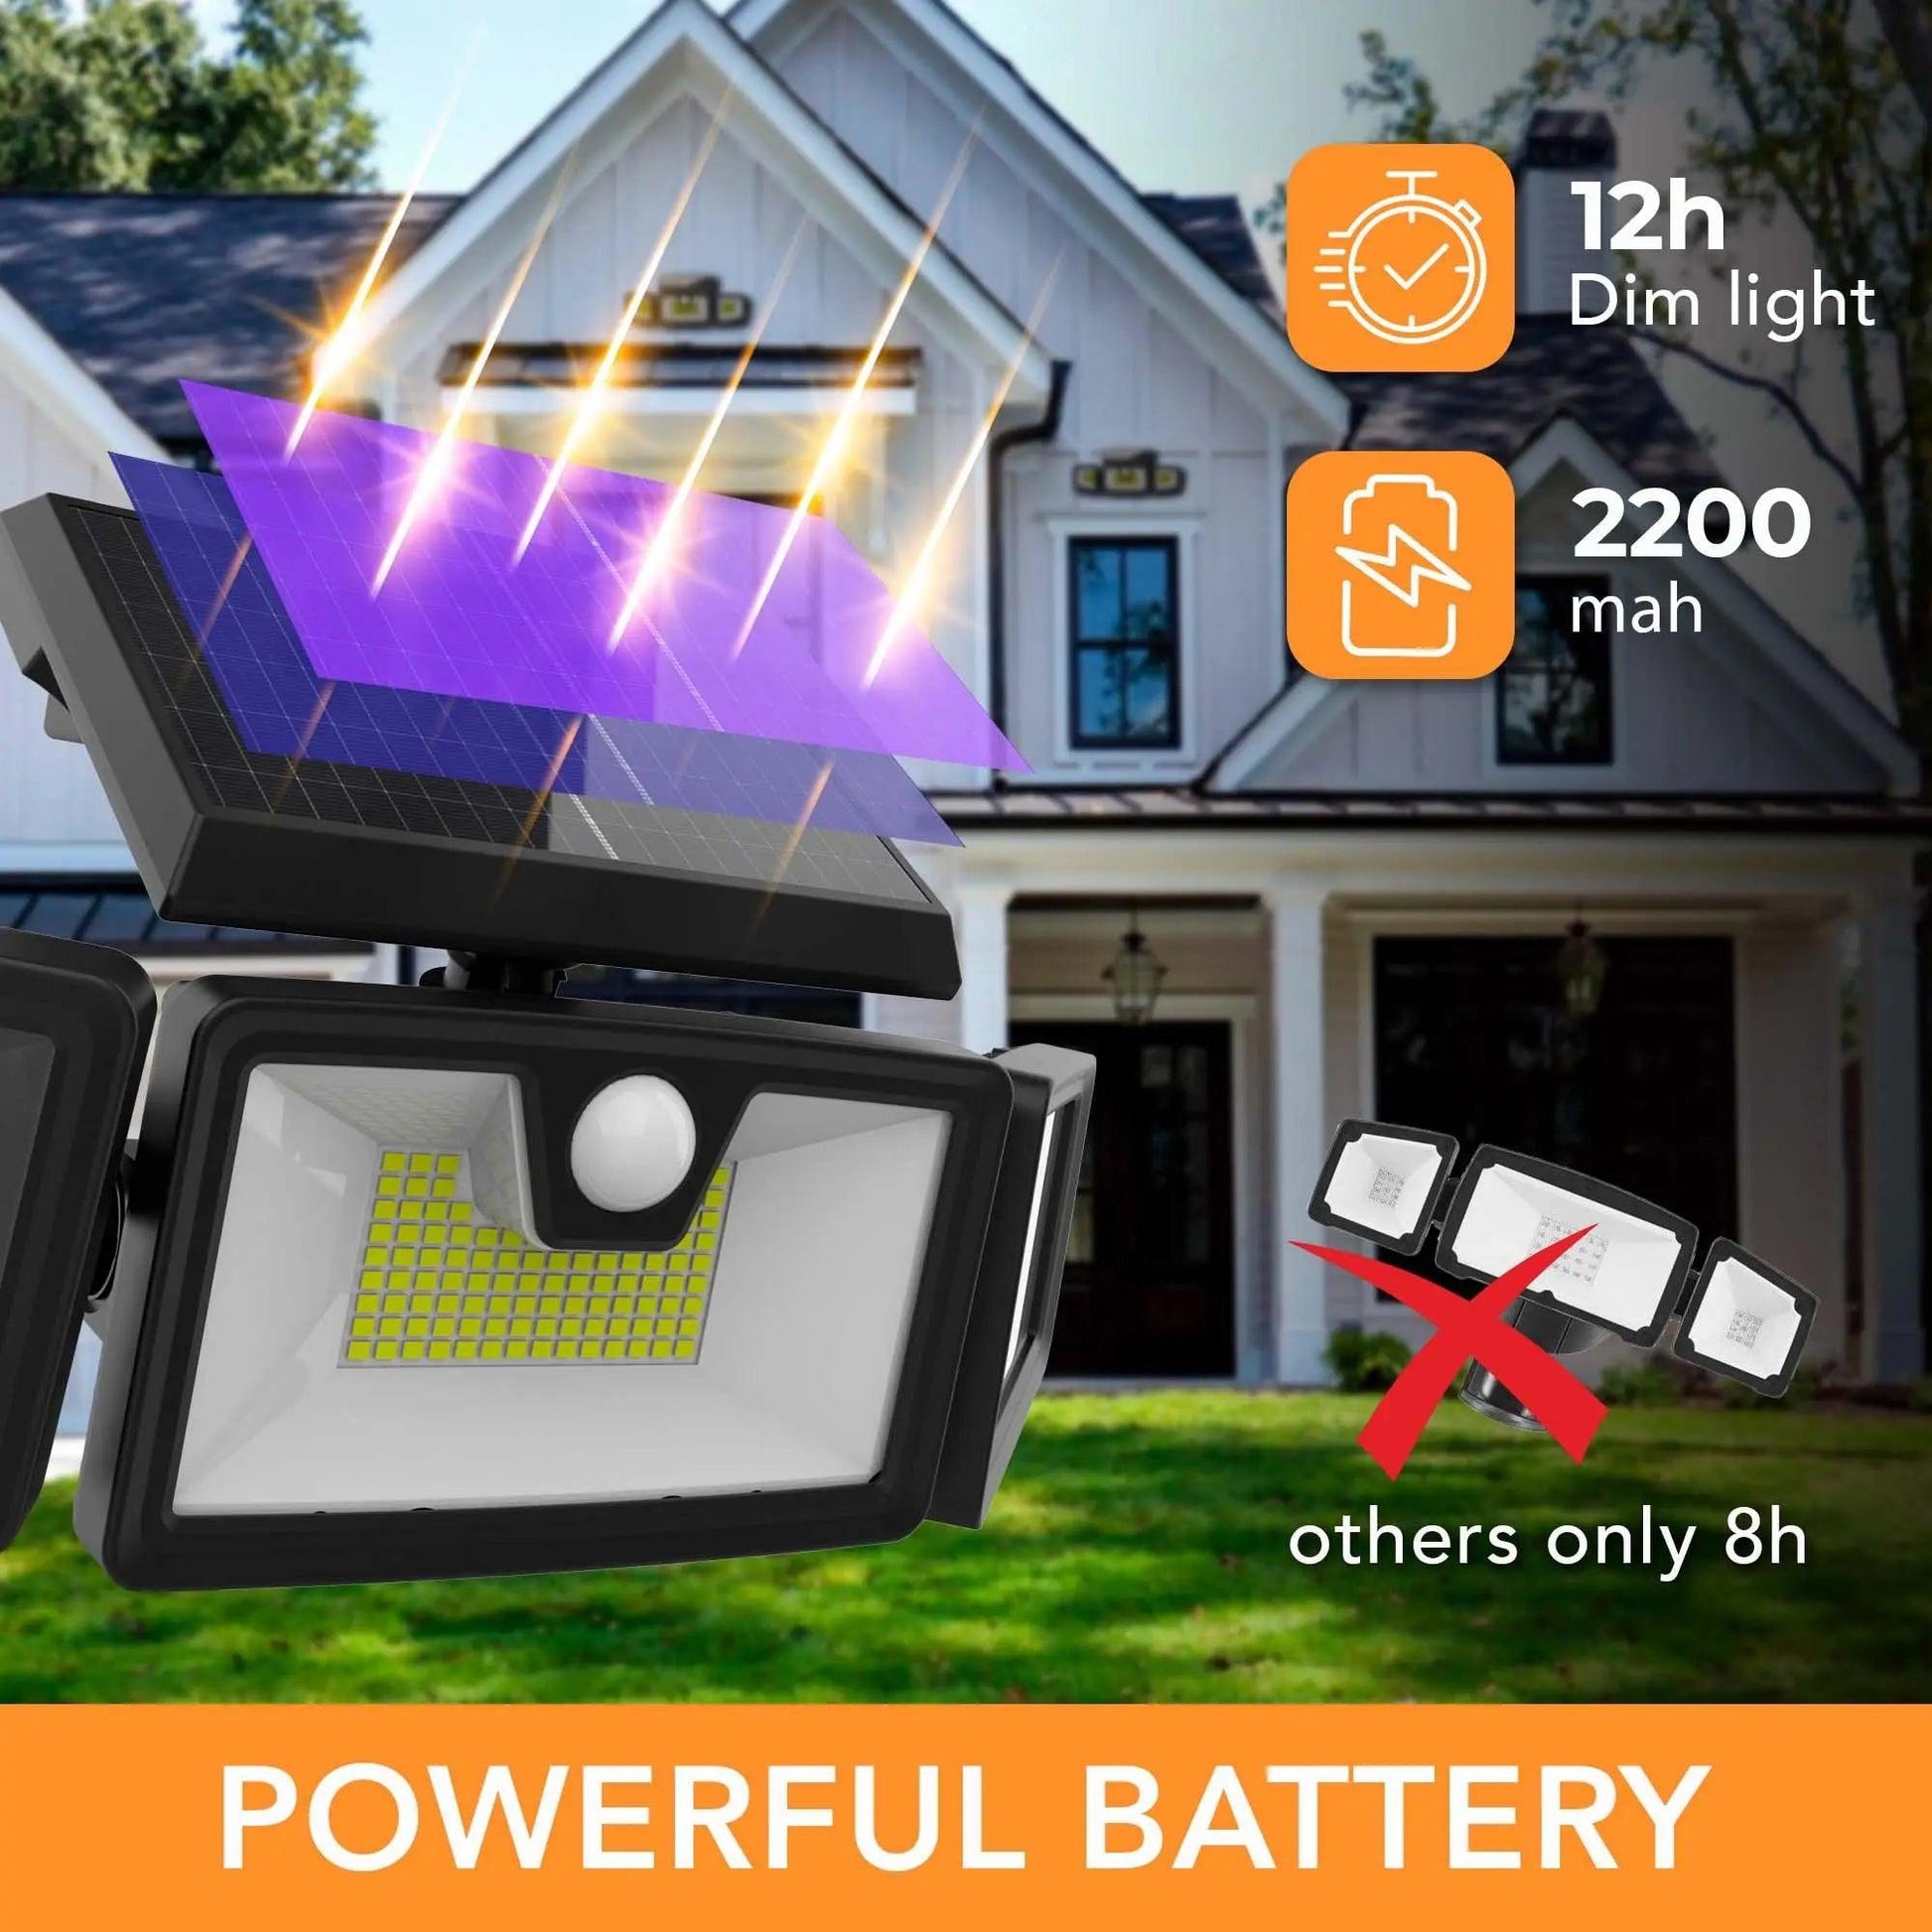 LazyLights X216 - Outdoor Security Solar Lights: 216 LED, Adjustable 360°, 3 Modes (2 pack) - Lazy Pro